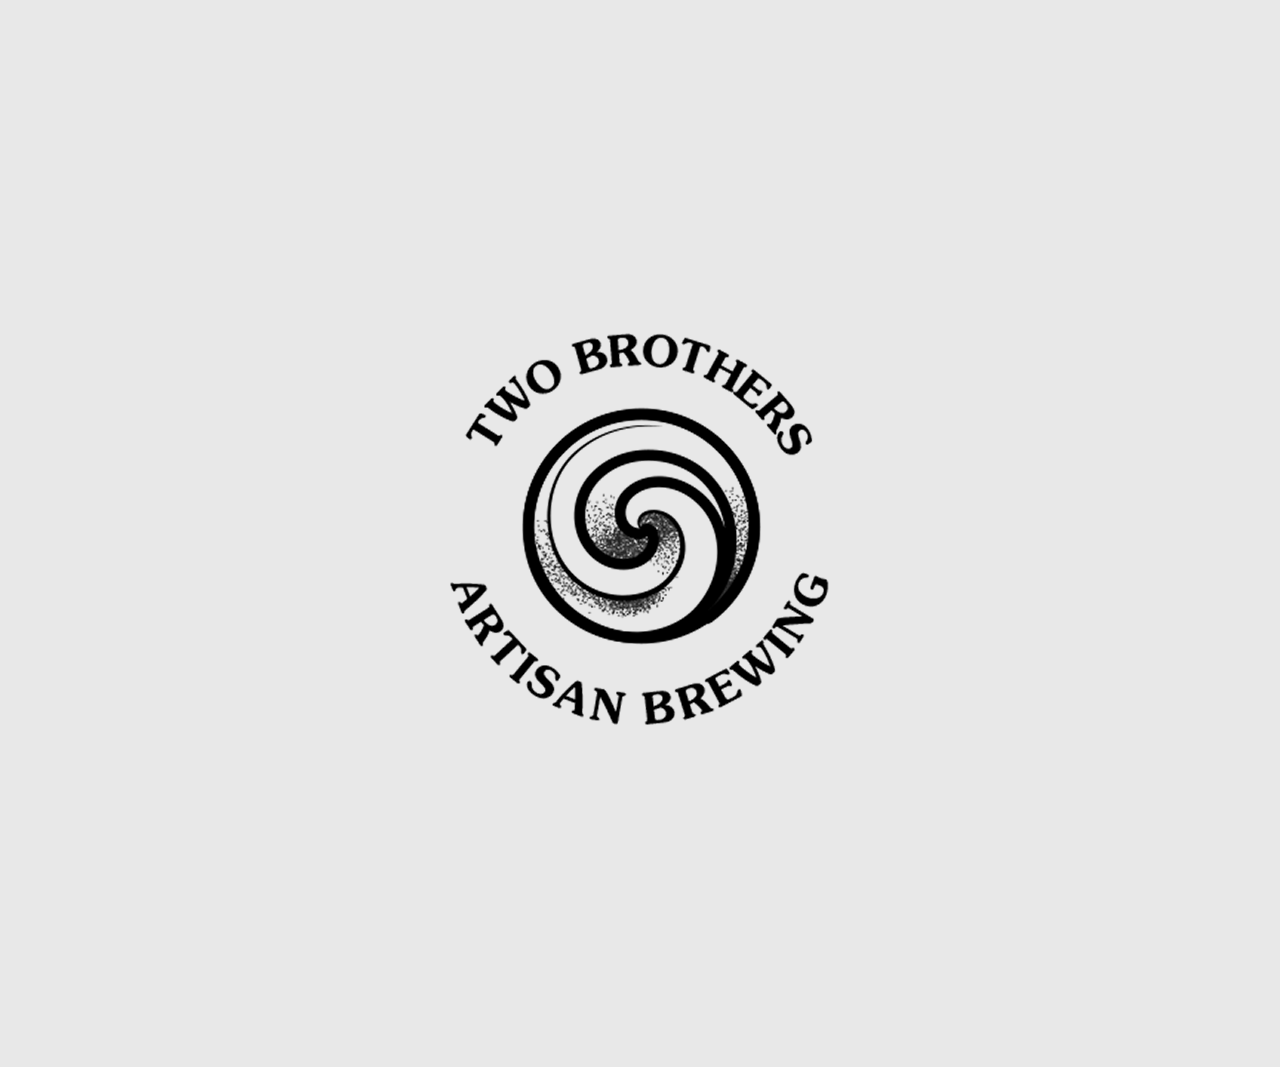 twobrothers__0009_X01.png